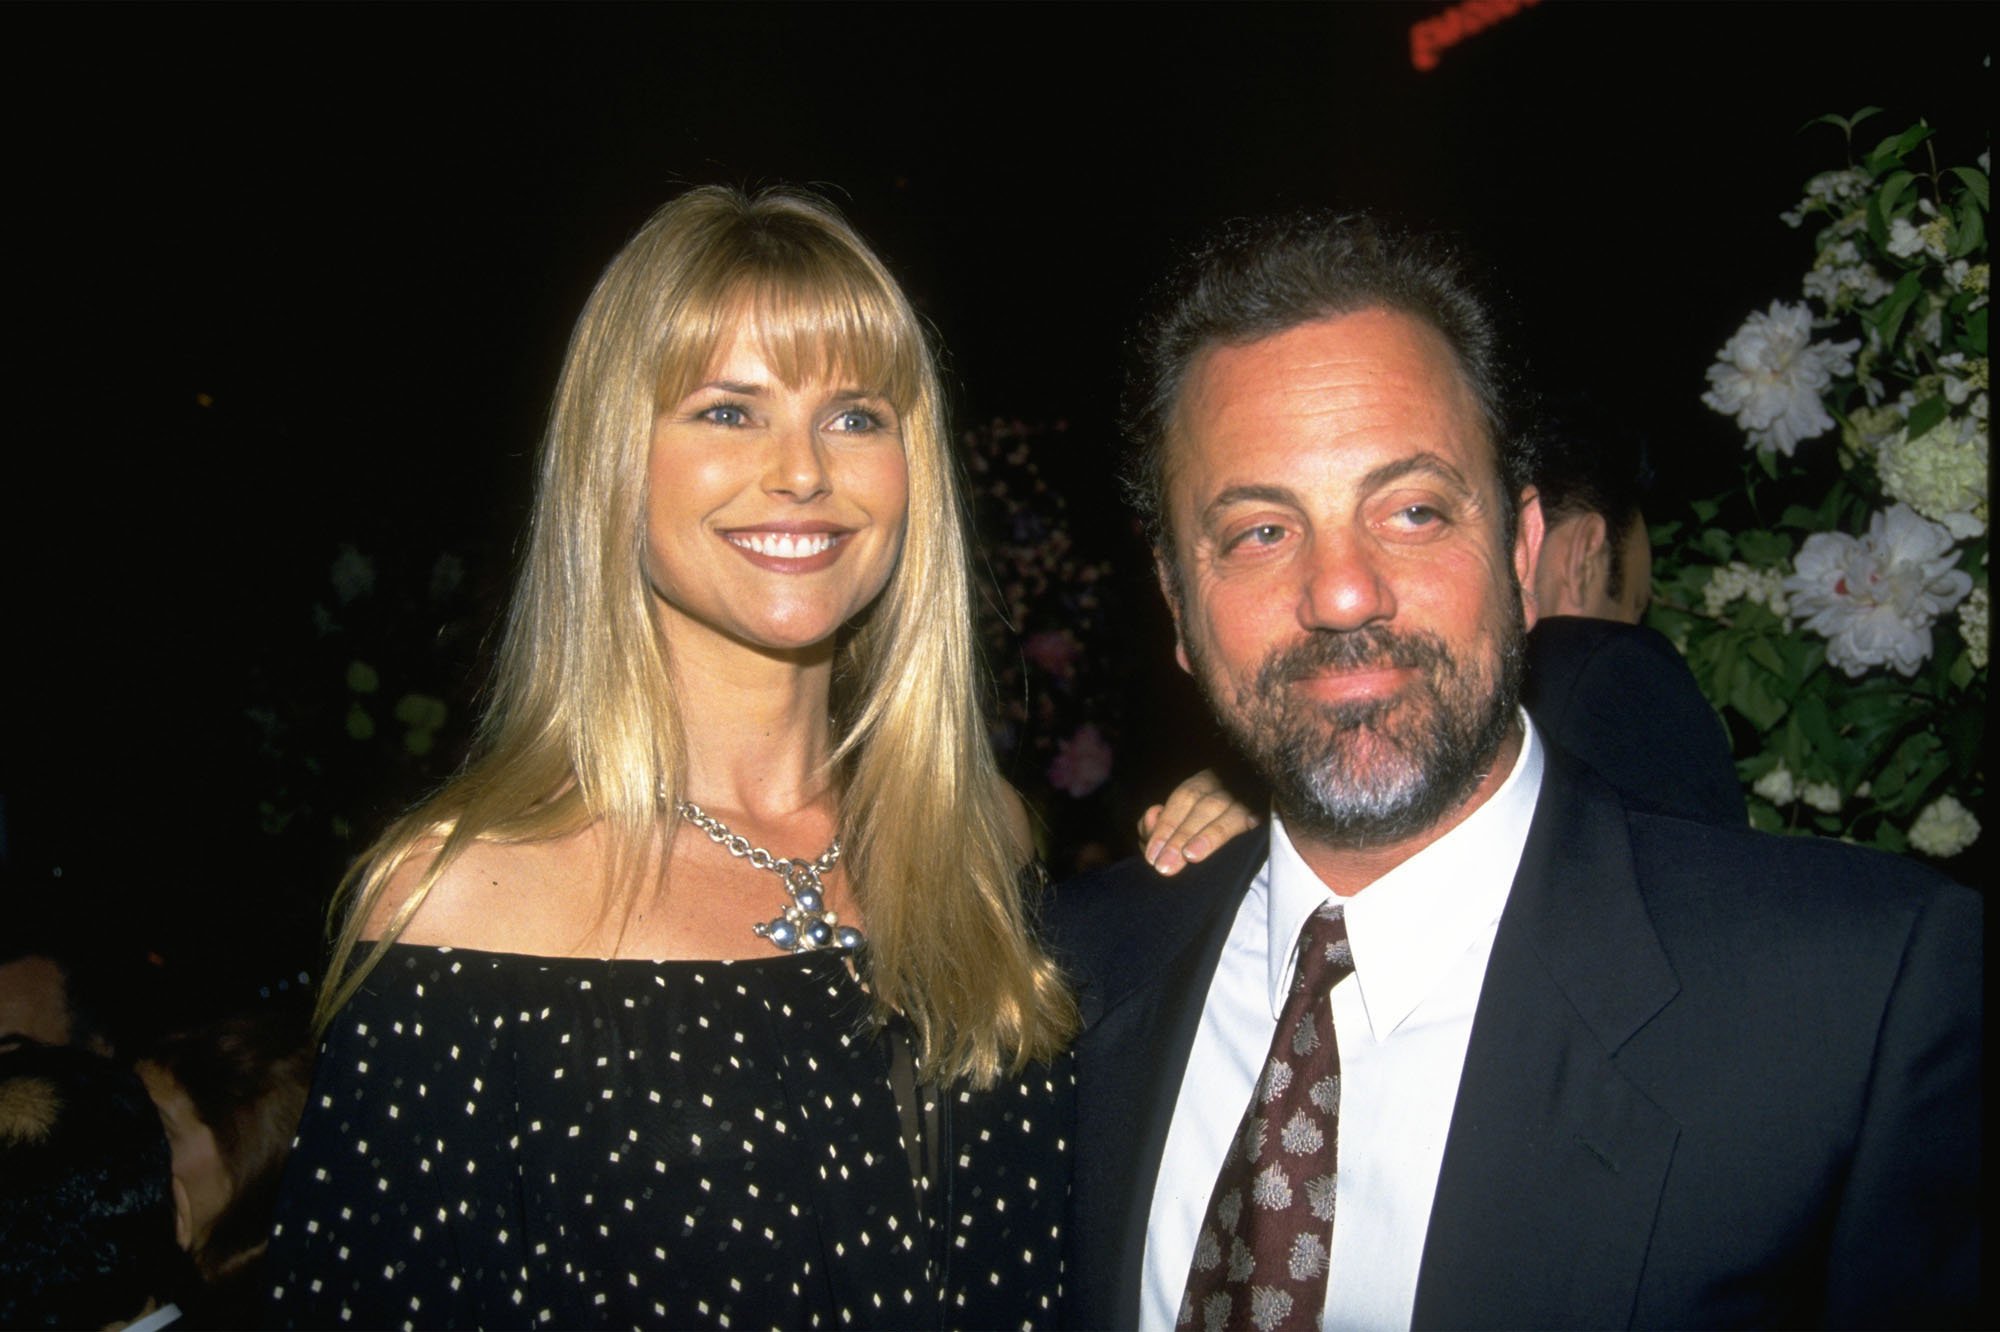 Christie Brinkley and Billy Joel. I Image: Getty Images.